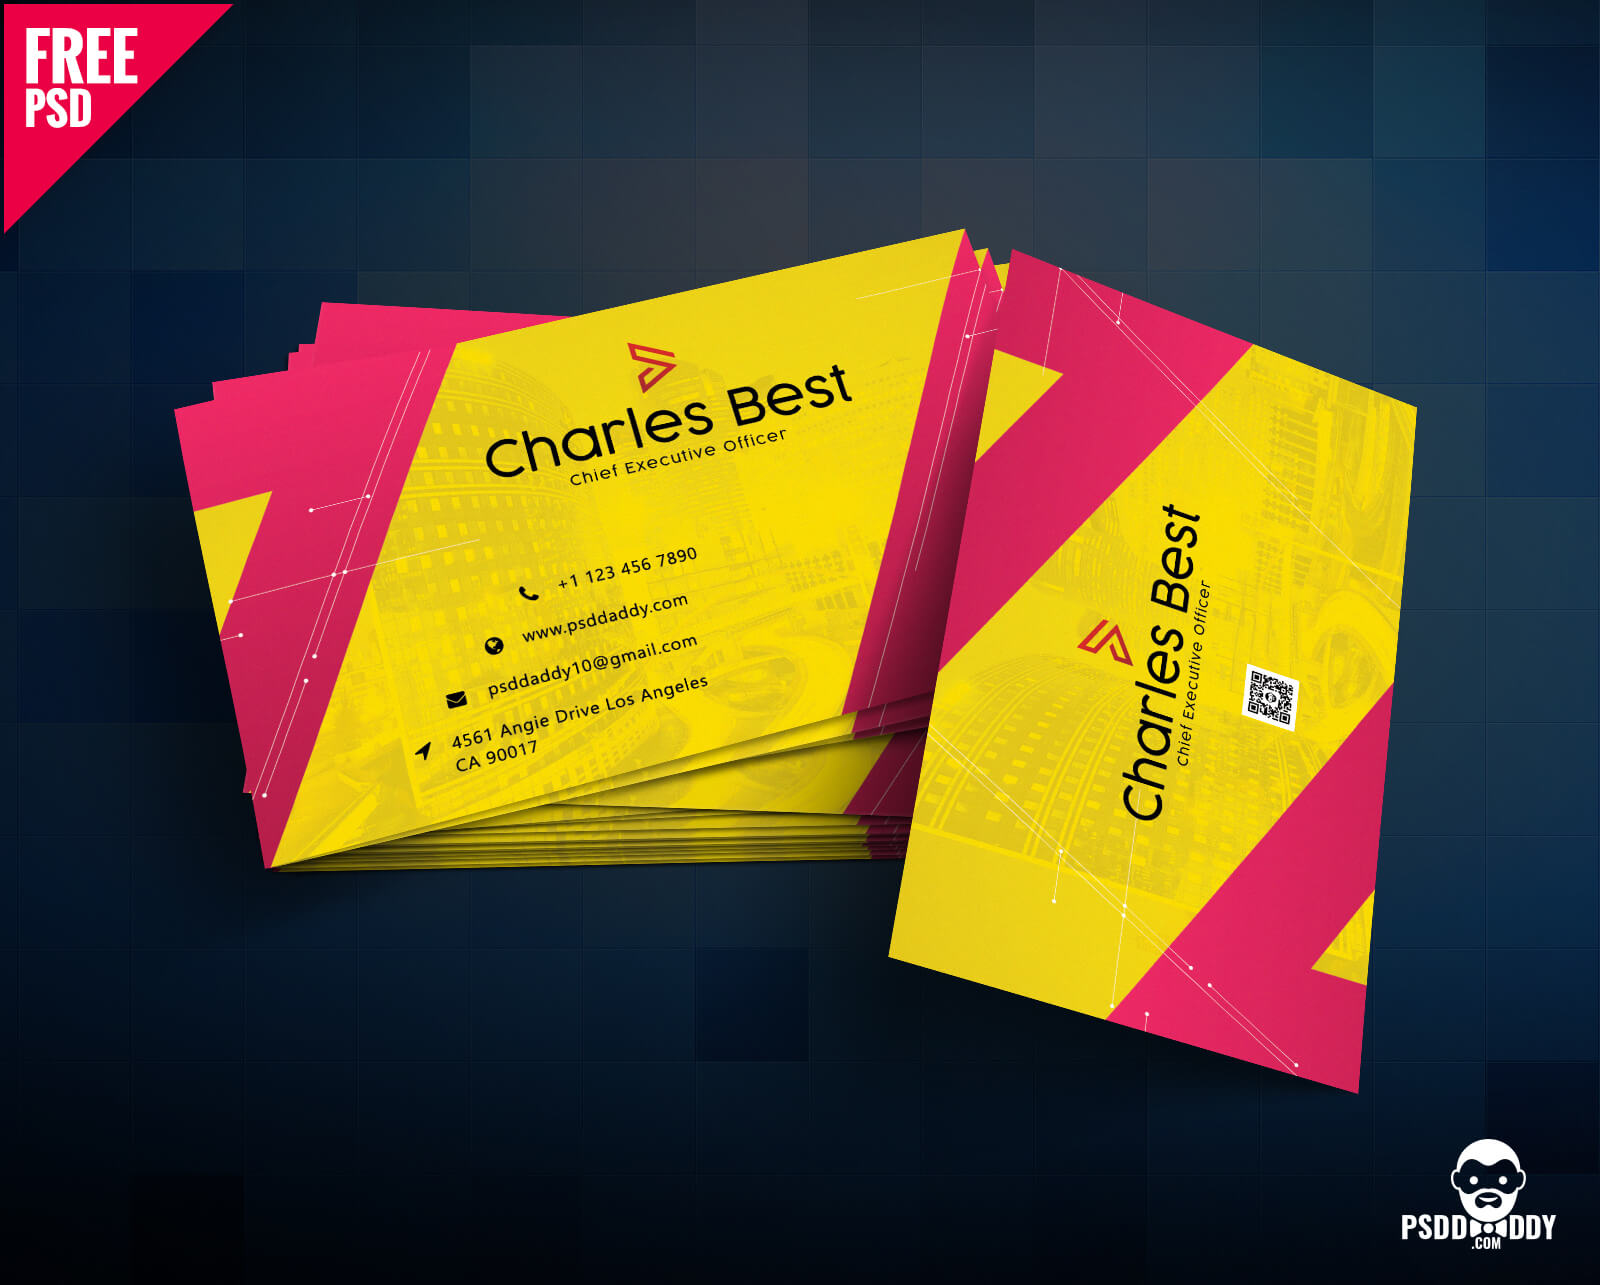 Download] Creative Business Card Free Psd | Psddaddy For Name Card Photoshop Template